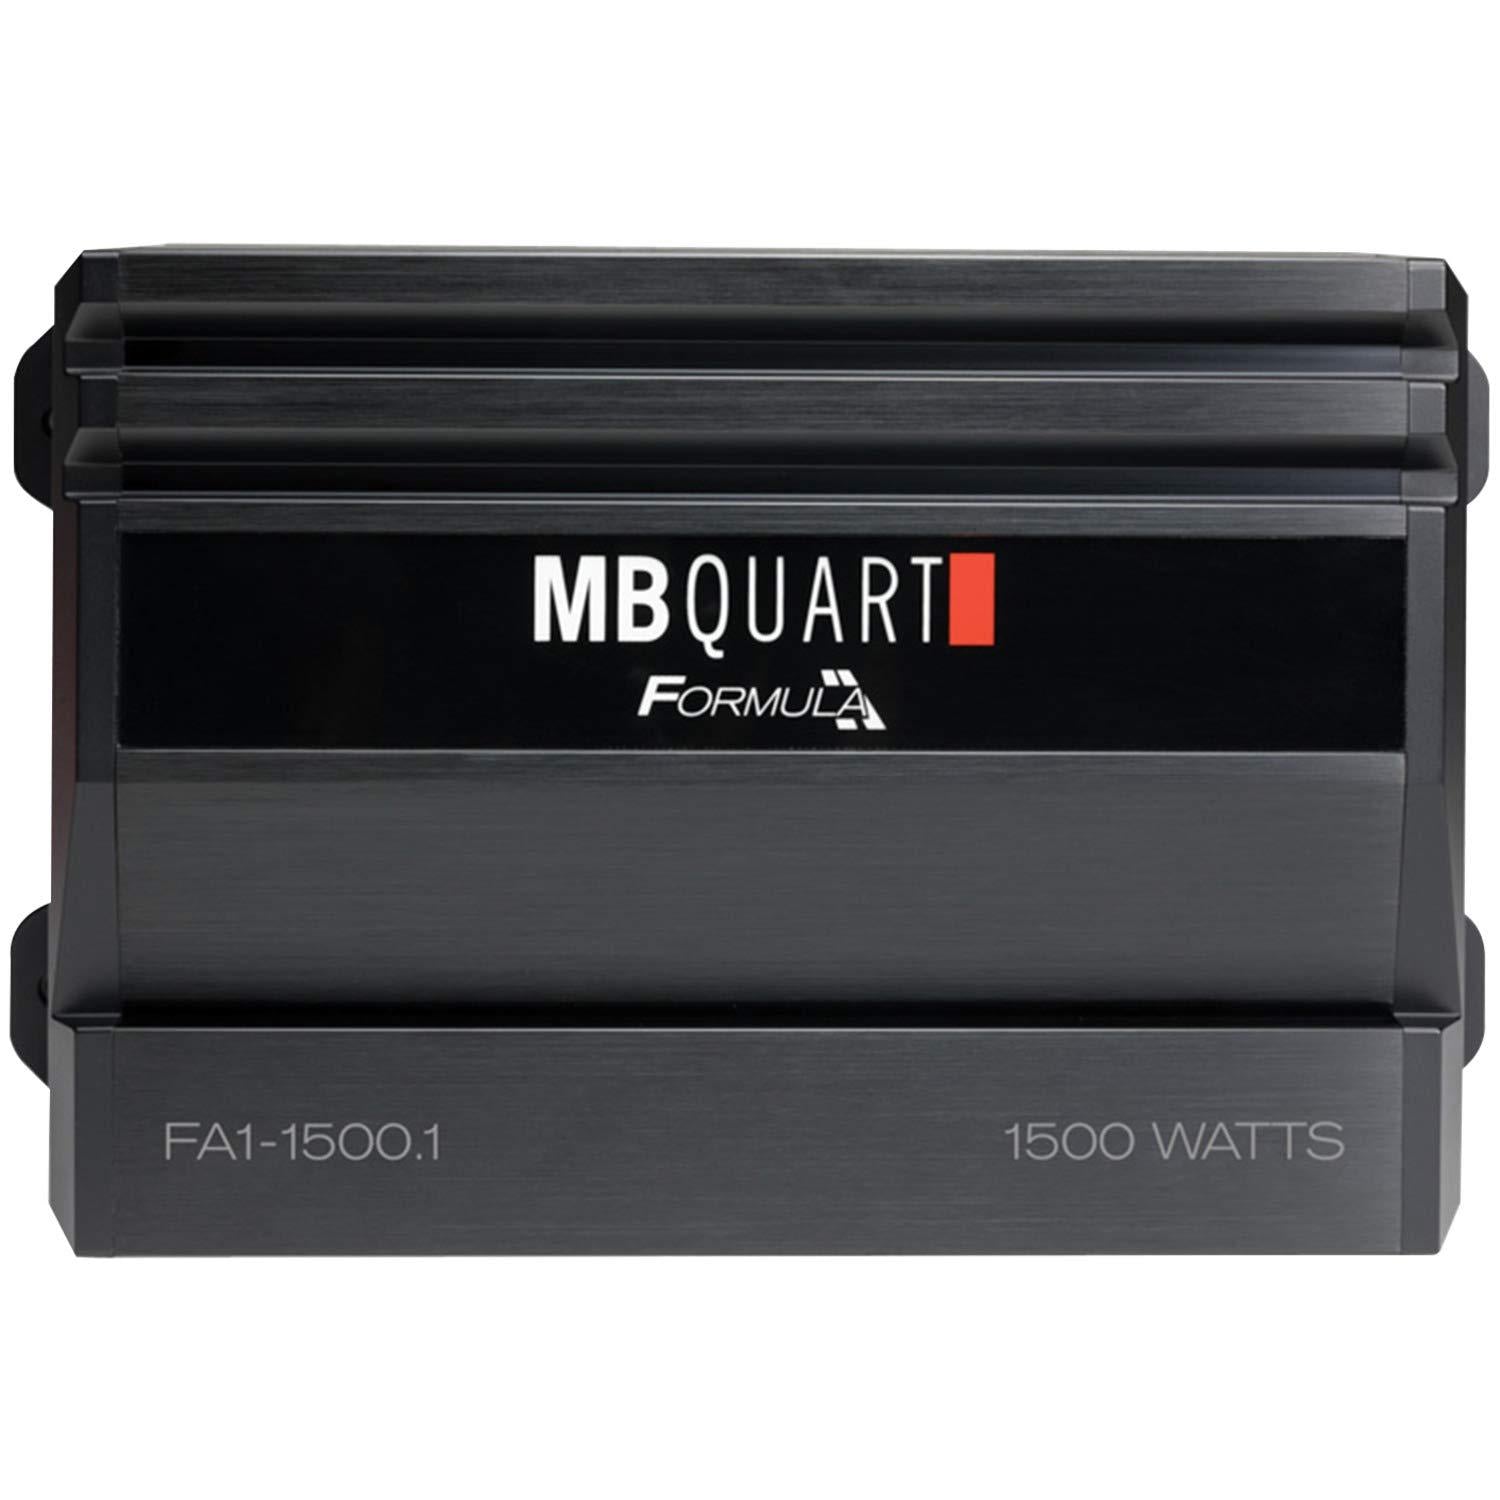 MB Quart, MB Quart FA1-1500.1 Mono Channel Car Audio Amplifier (Black) - Class SQ Amp, 1500-Watt, 1 Ohm Stable, Variable Electronic Crossover, LED System Protection, Heavy Duty Connections, Bass Remote Included